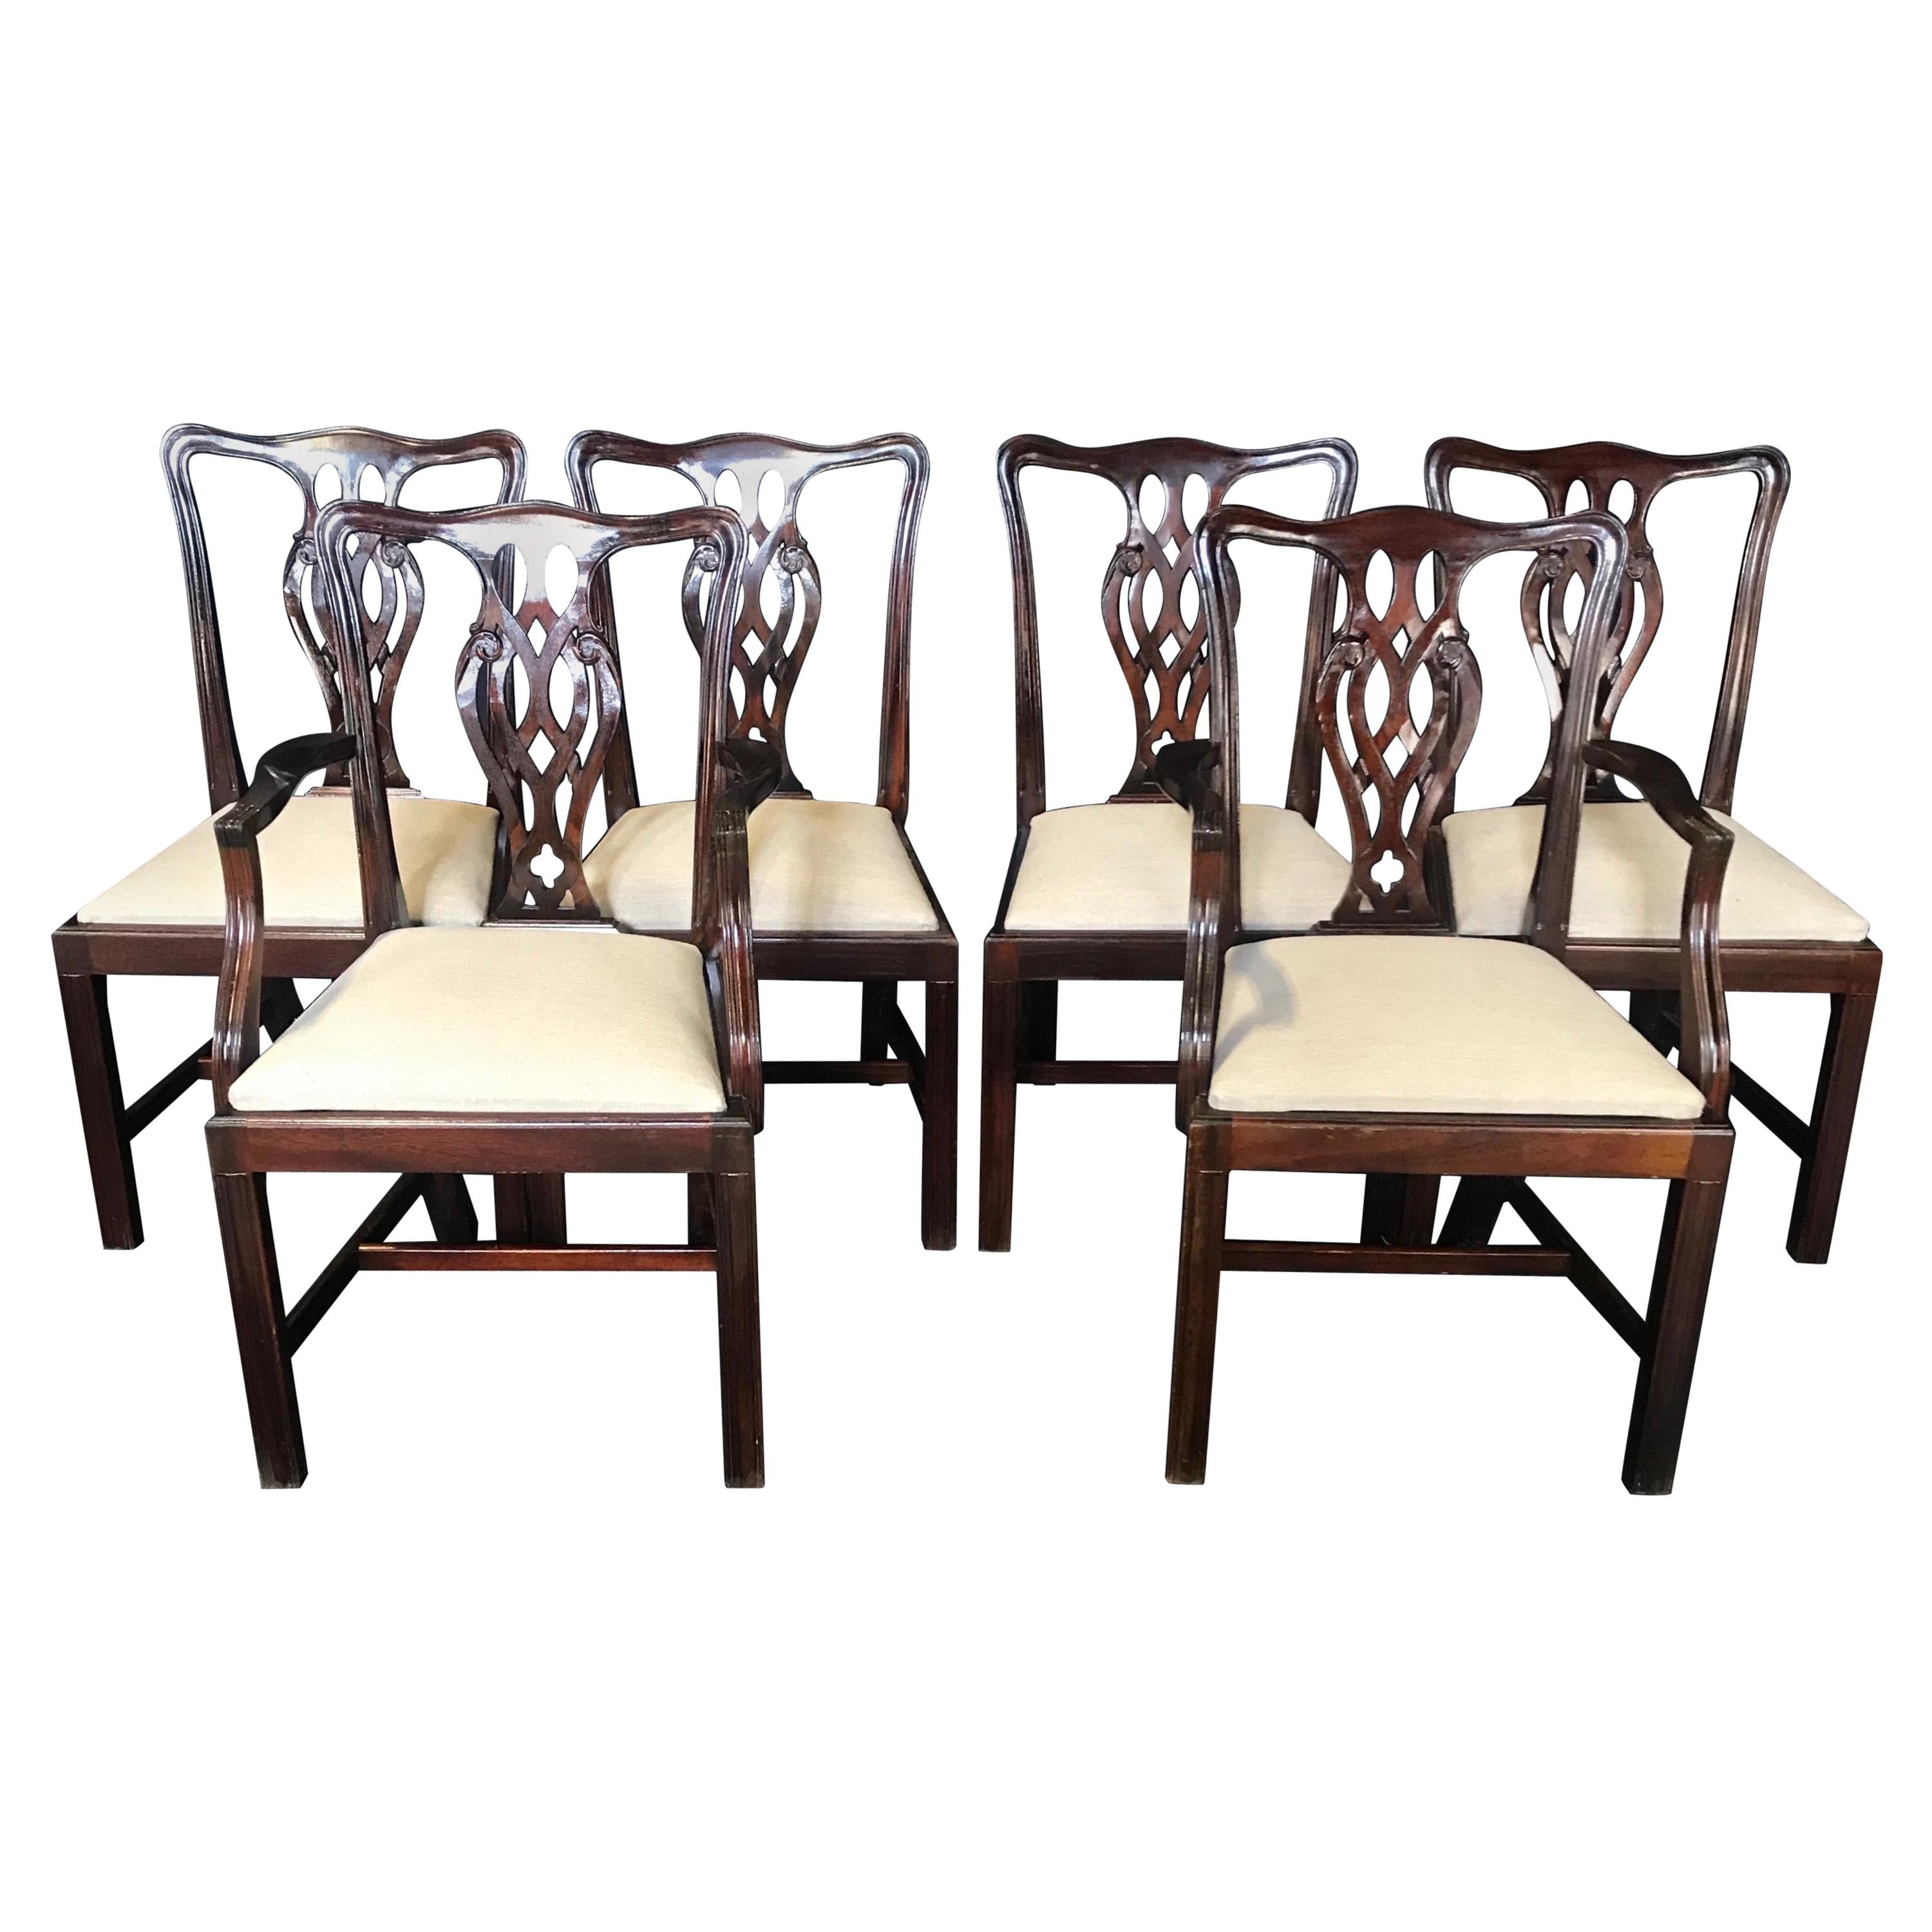 Set of 6 Handsome Fine English Chippendale Style Dining Chairs